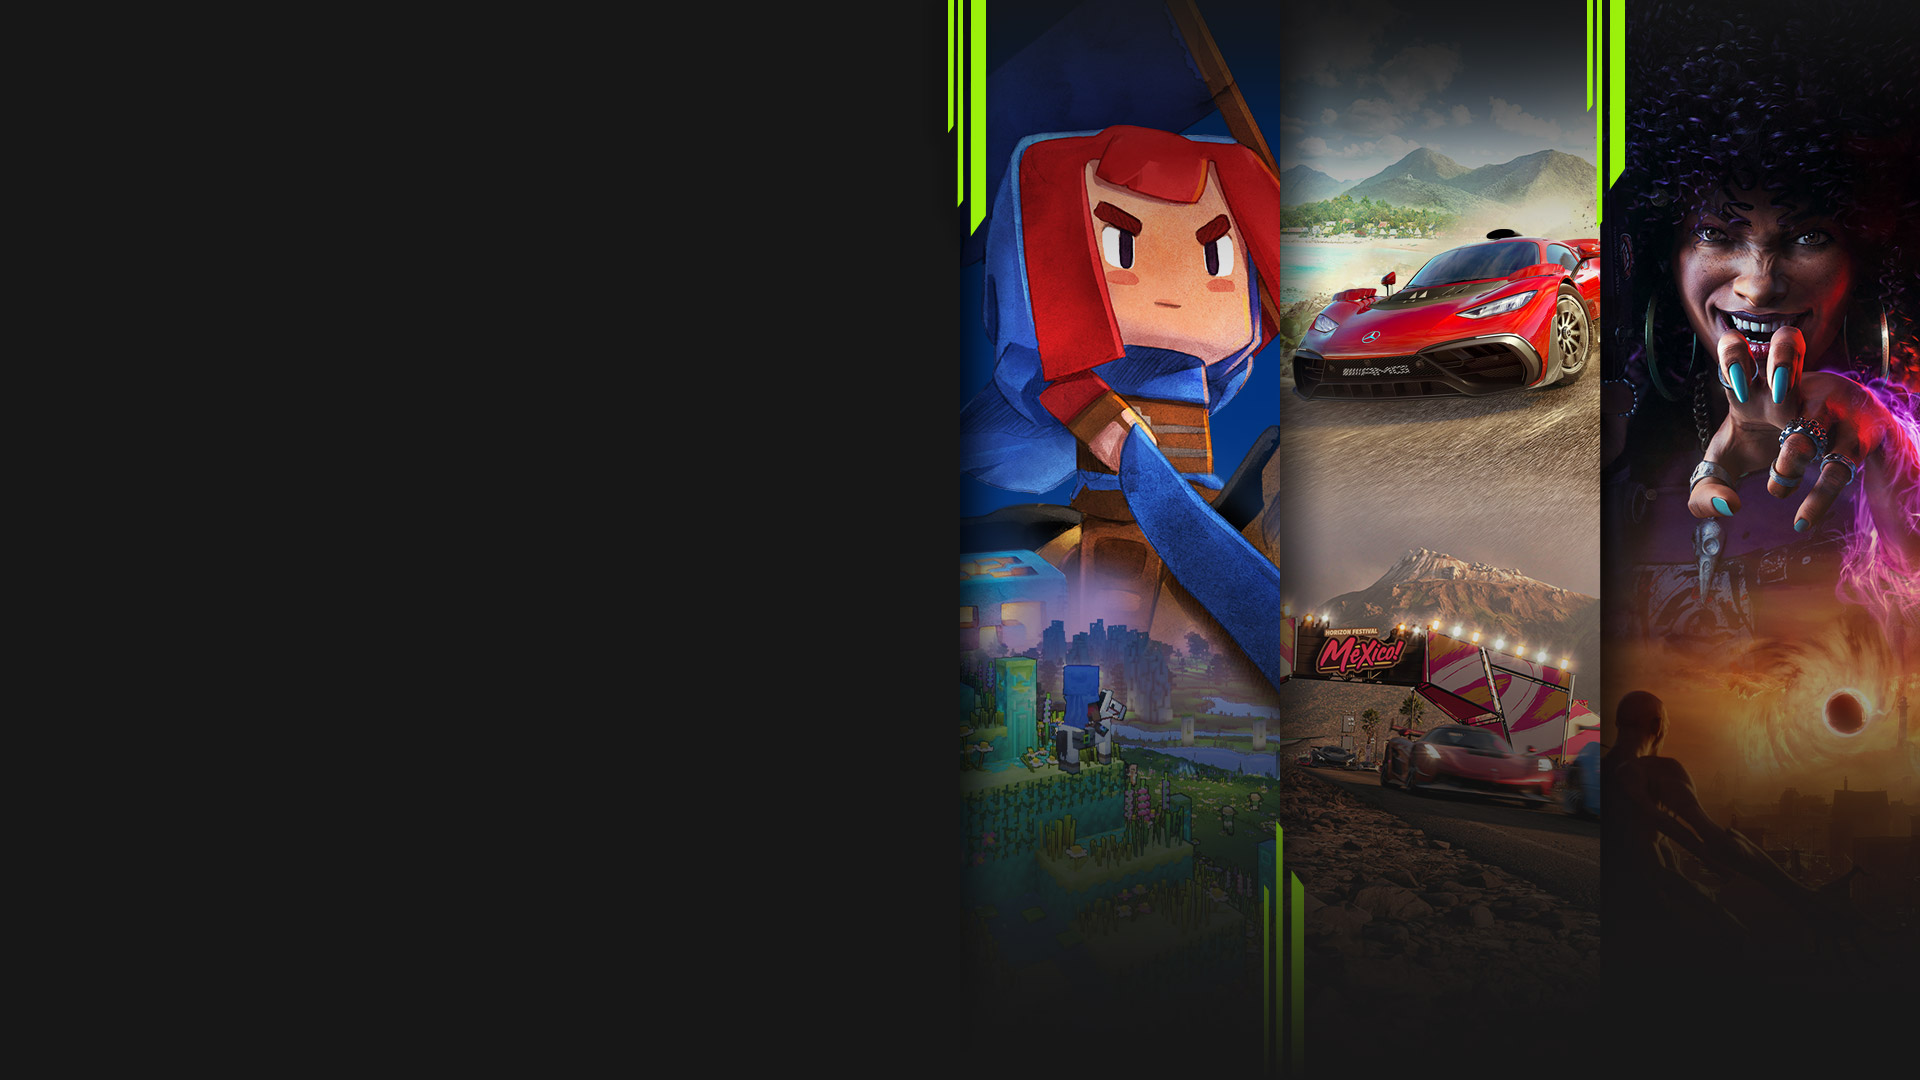 Game art from multiple games available with PC Game Pass, including Minecraft Legends, Forza Horizon 5, Redfall, and BlazBlue: Cross Tag Battle.